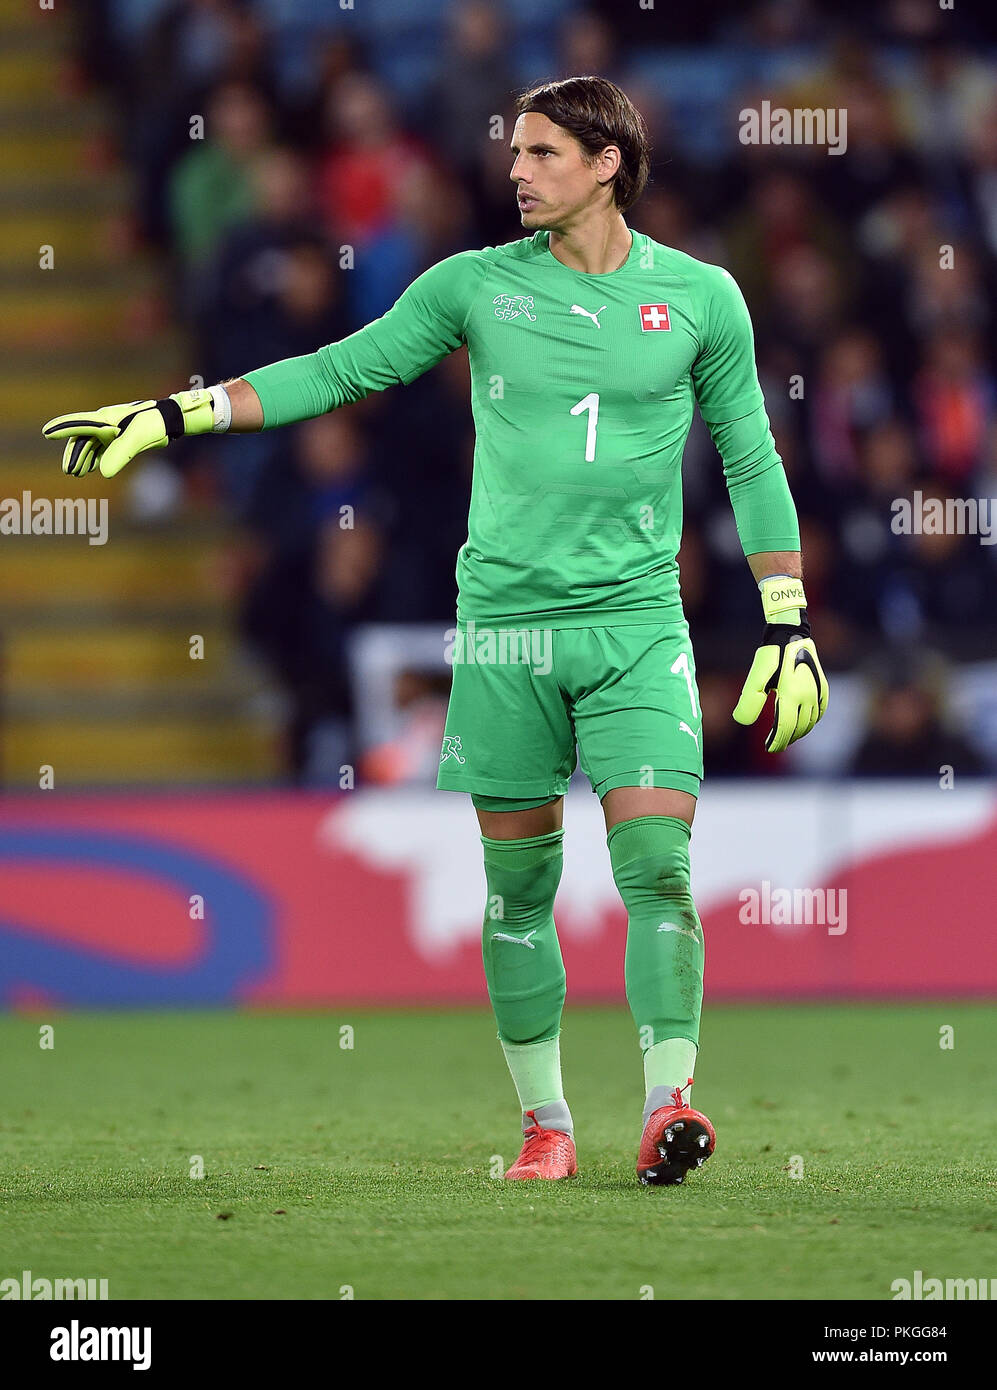 Switzerland goalkepeer Yann Sommer ENGLAND V SWITZERLAND INTERNATIONAL FRIENDLY ENGLAND V SWITZERLAND INTERNATIONAL FRIENDLY 11 September 2018 GBC12076 STRICTLY EDITORIAL USE ONLY. If The Player/Players Depicted In This Image Is/Are Playing For An English Club Or The England National Team. Then This Image May Only Be Used For Editorial Purposes. No Commercial Use. The Following Usages Are Also Restricted EVEN IF IN AN EDITORIAL CONTEXT: Use in conjuction with, or part of, any unauthorized audio, video, data, fixture lists, club/league logos, Betting, Games or any 'live' servi Stock Photo